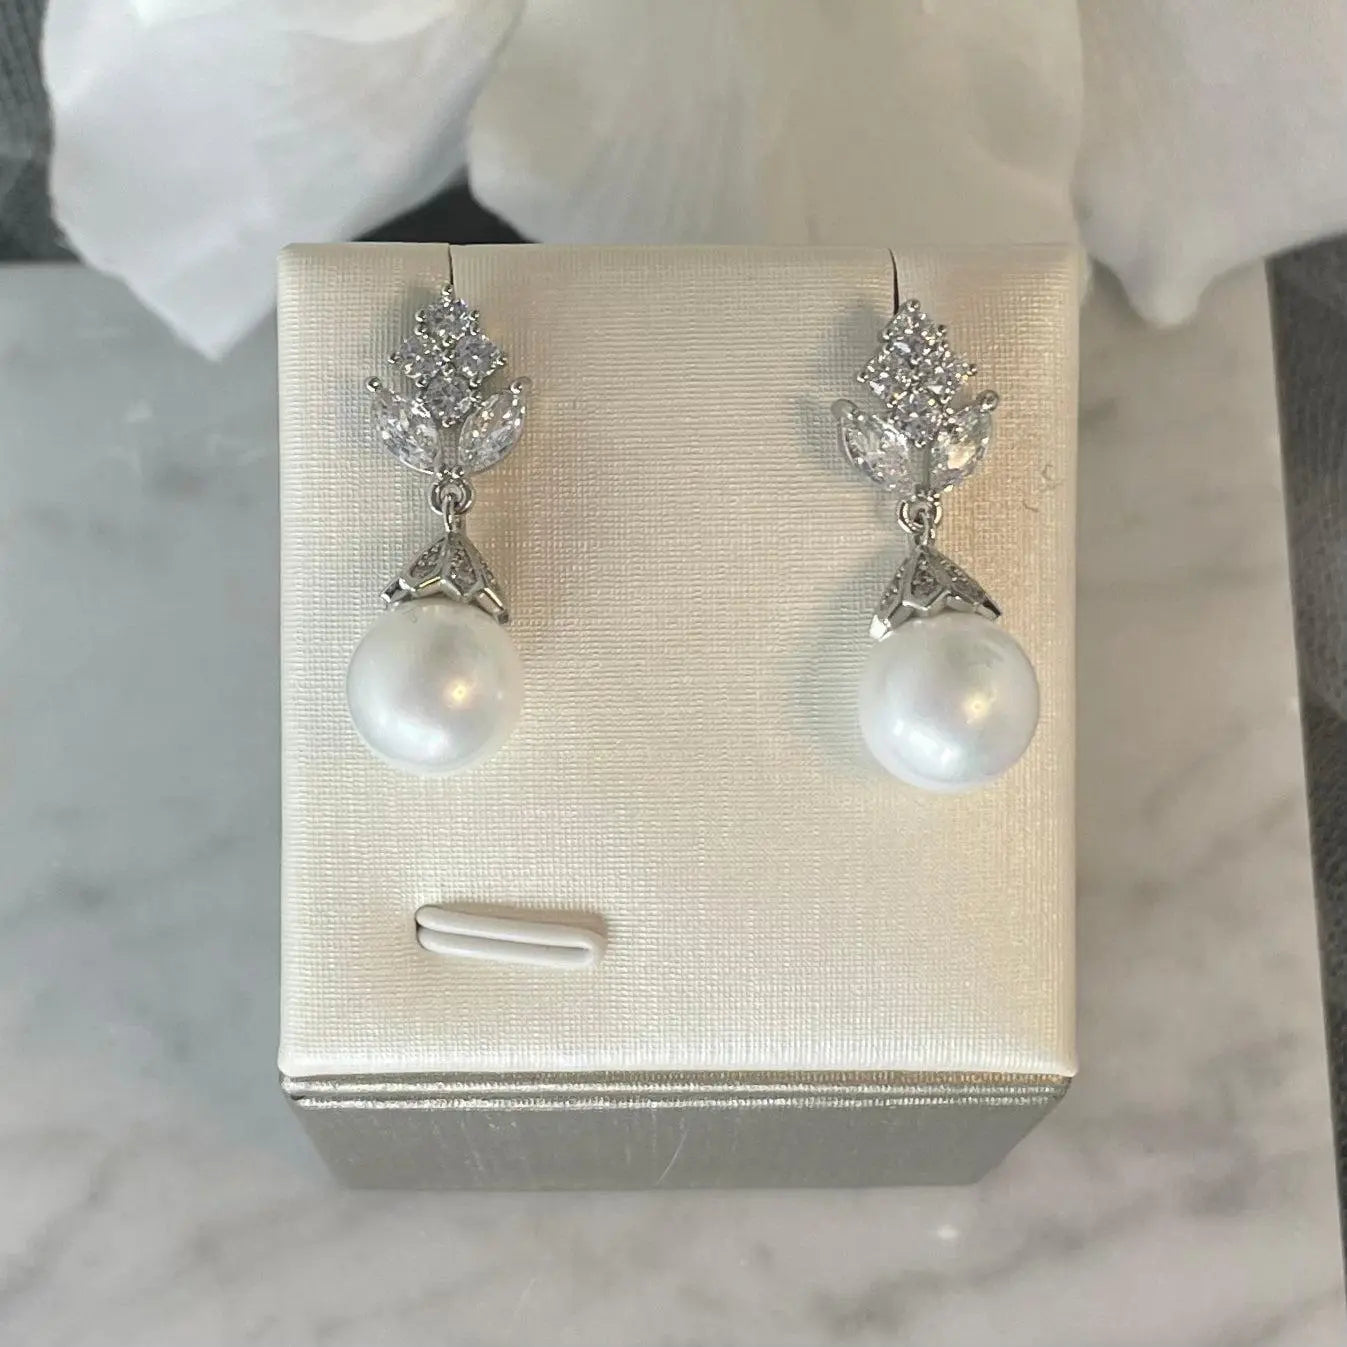 Aloes Pearl Bridal Earrings featuring a flower design with princess-cut cubic zirconia and a lustrous freshwater pearl, crafted from high-quality copper with 18k gold or silver plating, perfect for weddings and special occasions.